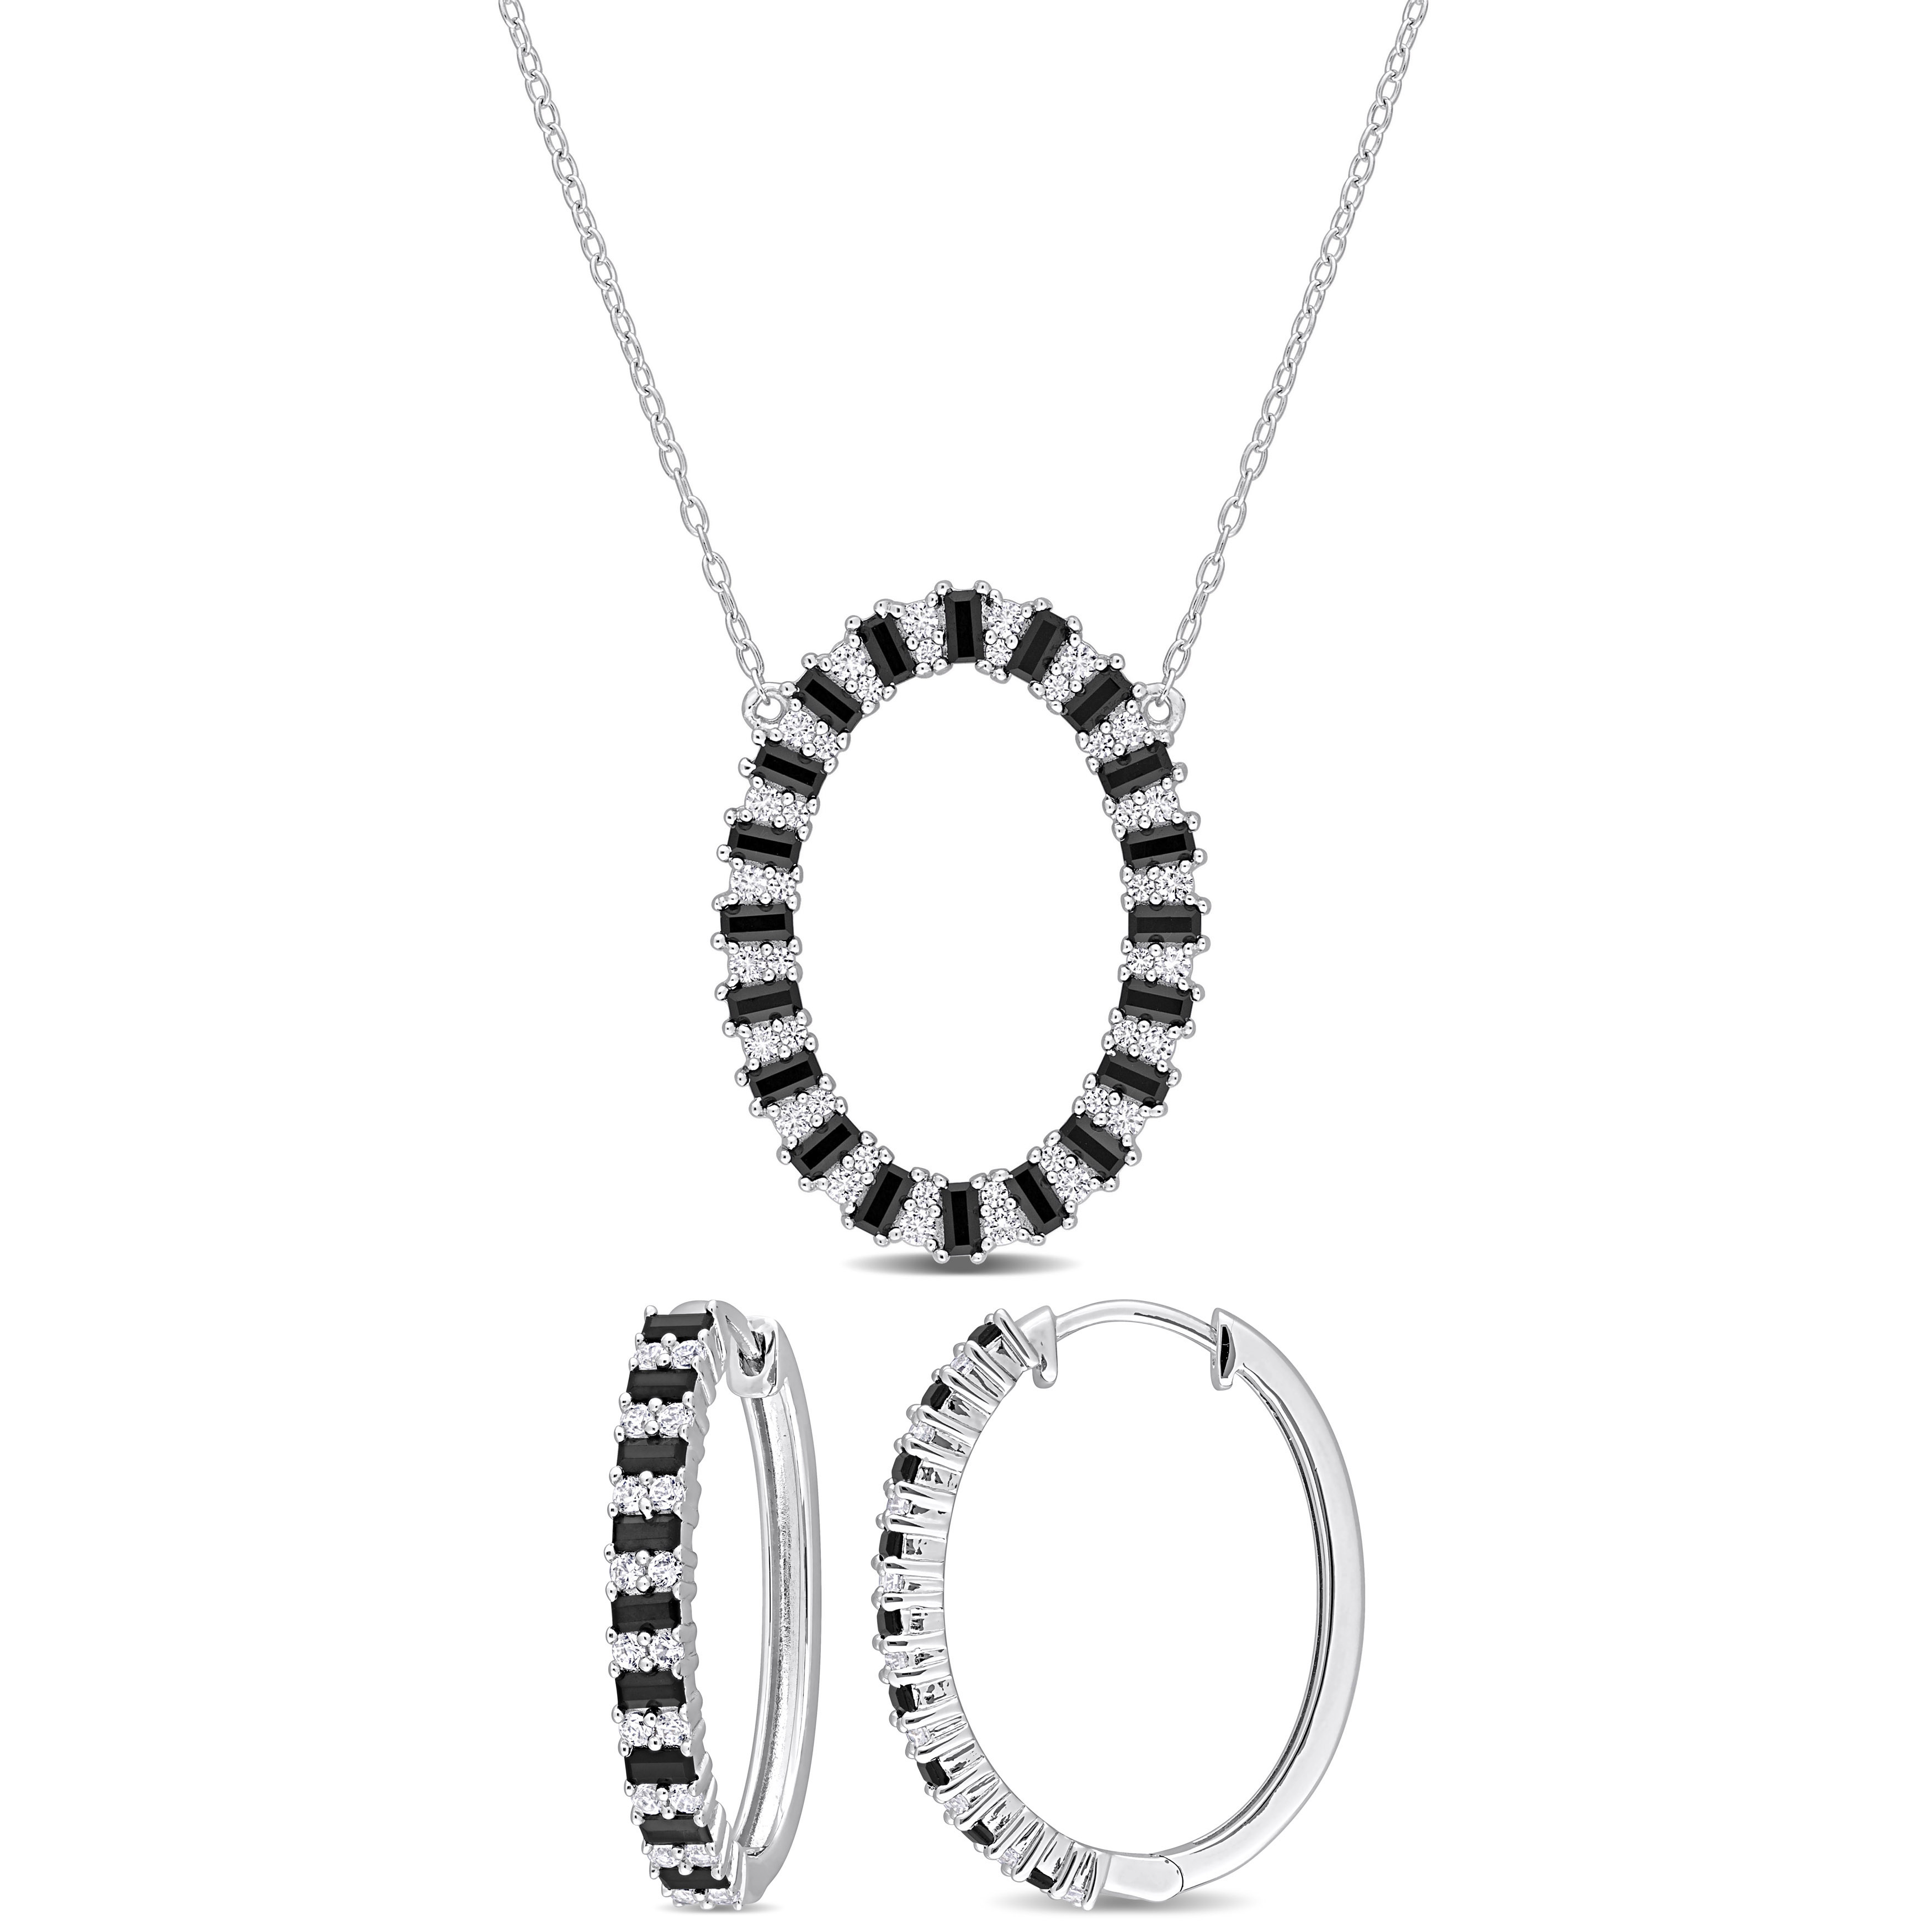 5 1/3 CT TGW Baguette-Cut Black Spinel and Created White Sapphire 2-Piece Necklace and Earrings Set in Sterling Silver